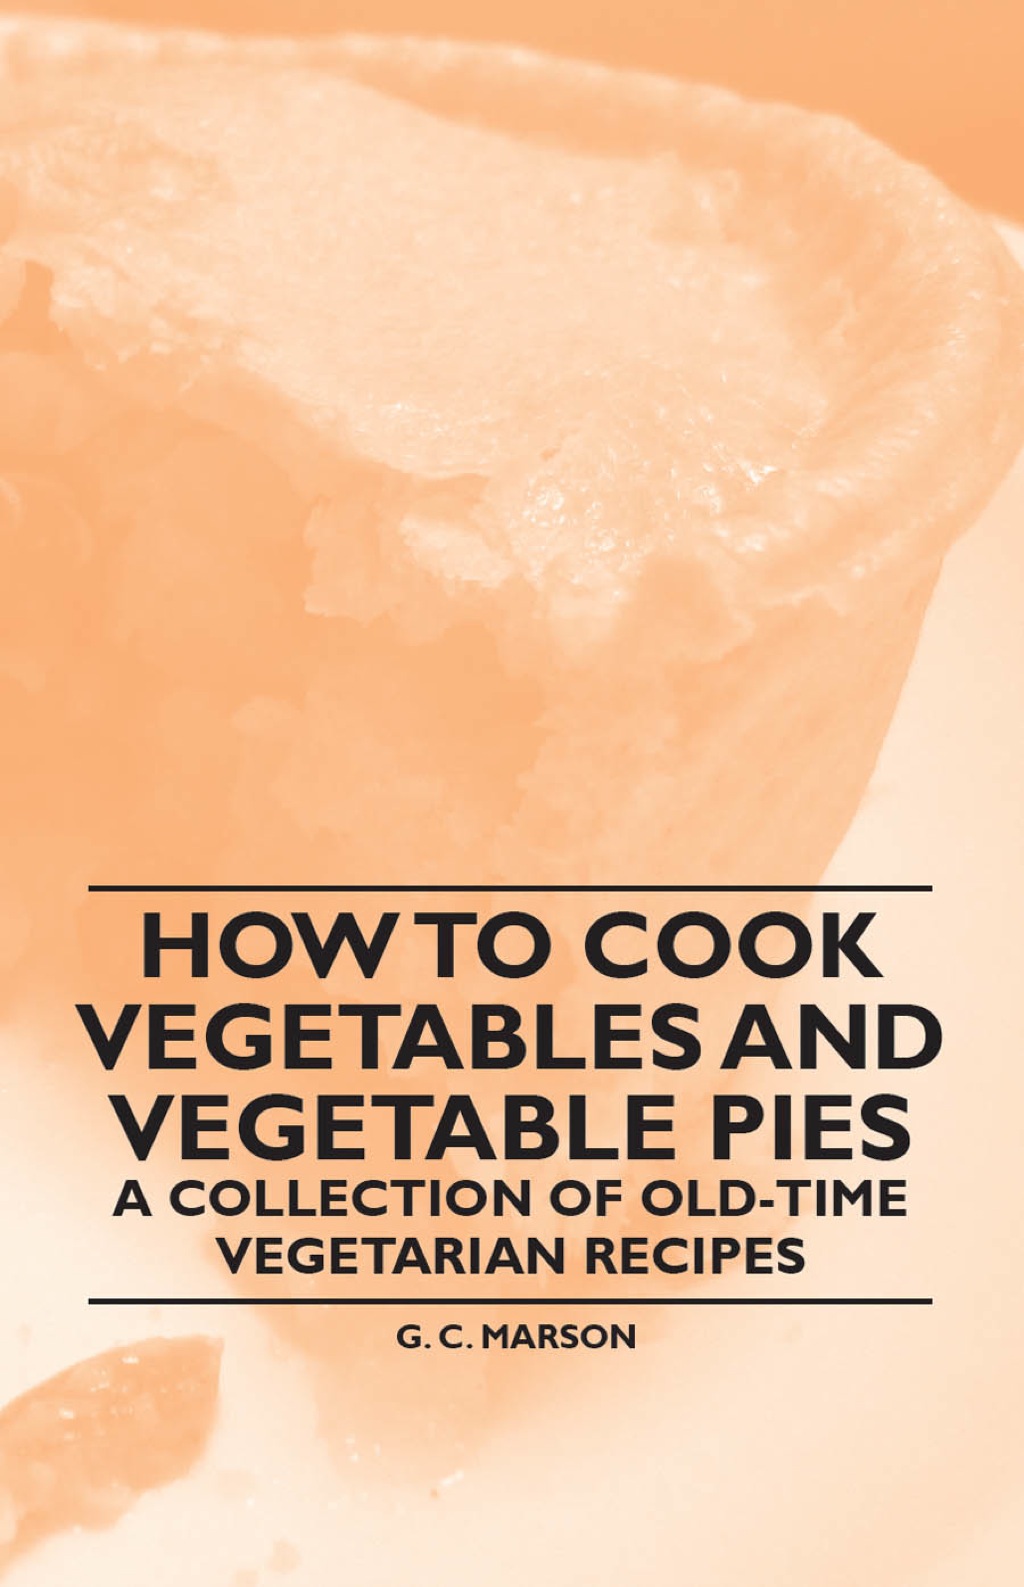 How to Cook Vegetables and Vegetable Pies - A Collection of Old-Time Vegetarian Recipes (eBook) - G. C. Marson,